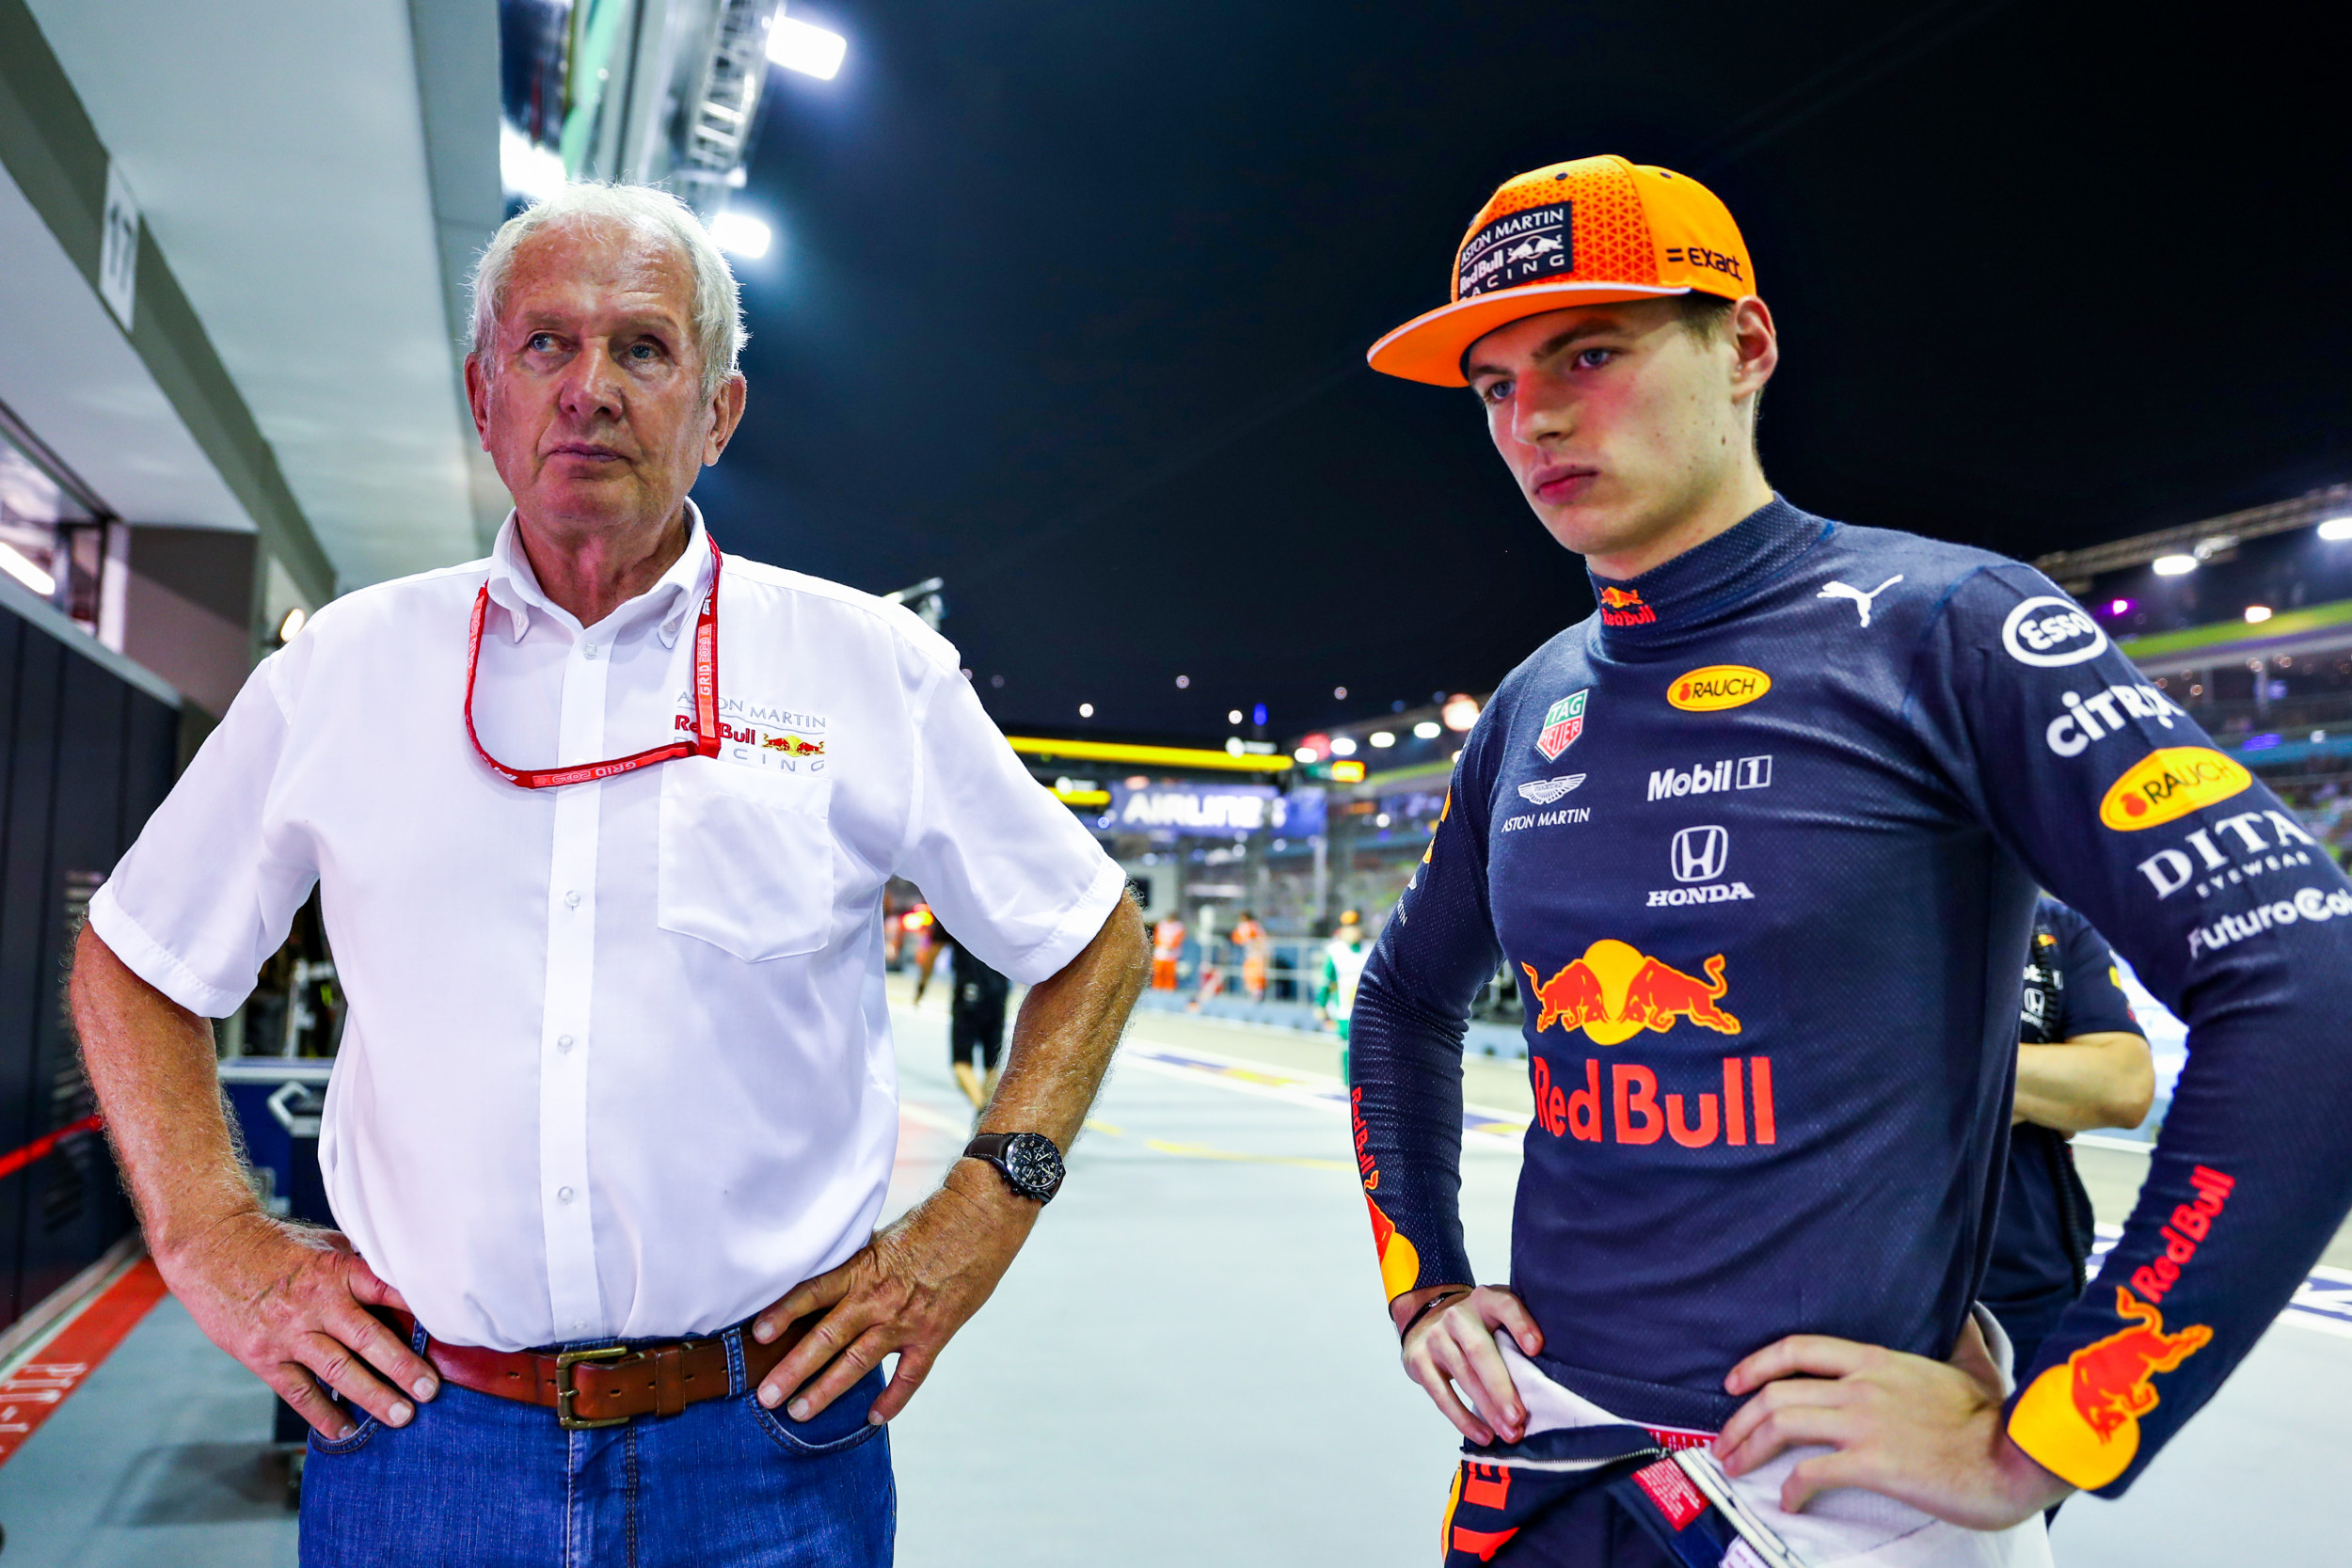 Sanktion scaring fup Red Bull F1 Boss Told Drivers to 'Become Infected With Coronavirus'